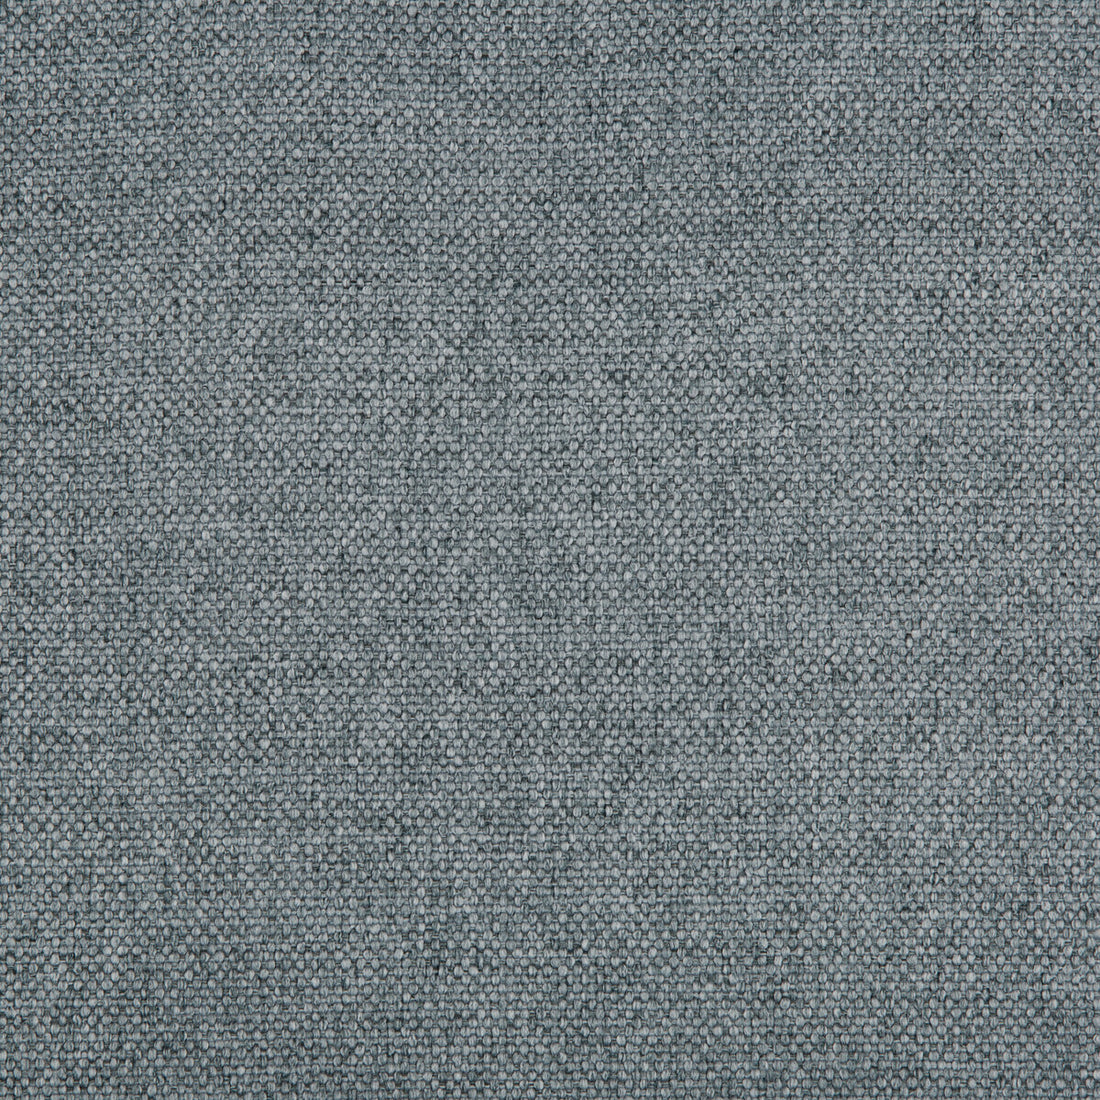 Kravet Contract fabric in 35412-15 color - pattern 35412.15.0 - by Kravet Contract in the Crypton Incase collection